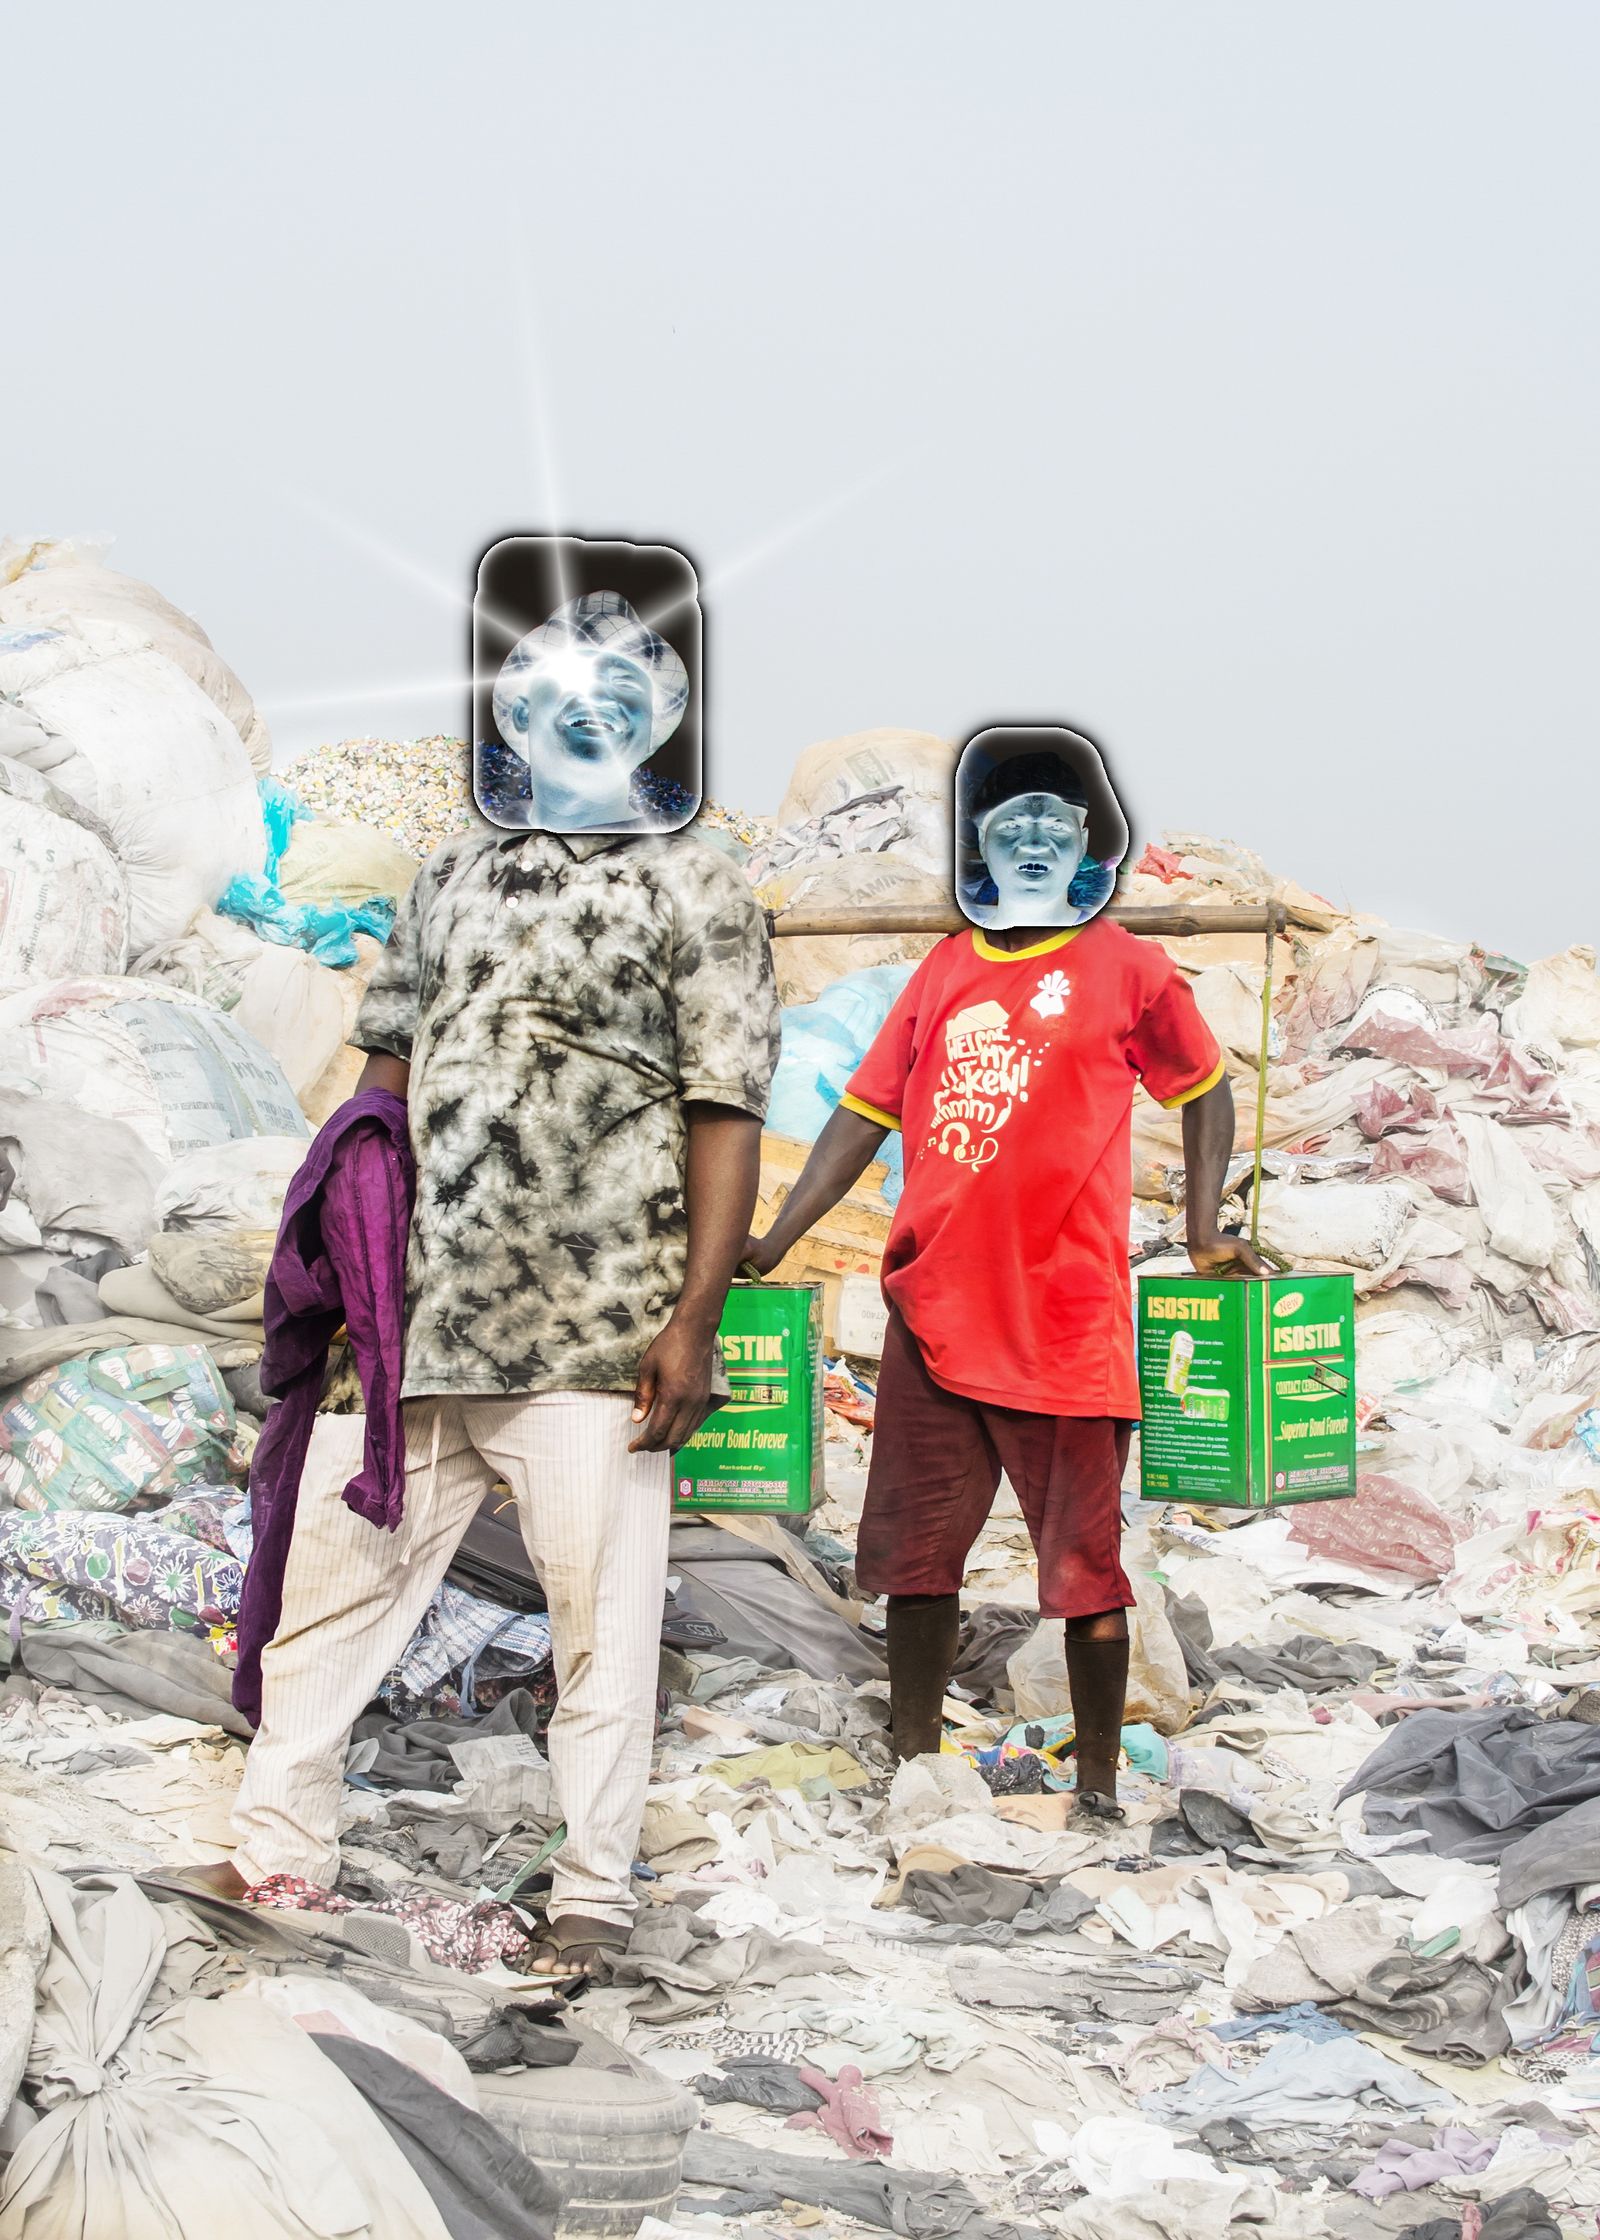 © Aàdesokan - Image from the WASTE IDENTITY: BOLA BOLA LIVING photography project